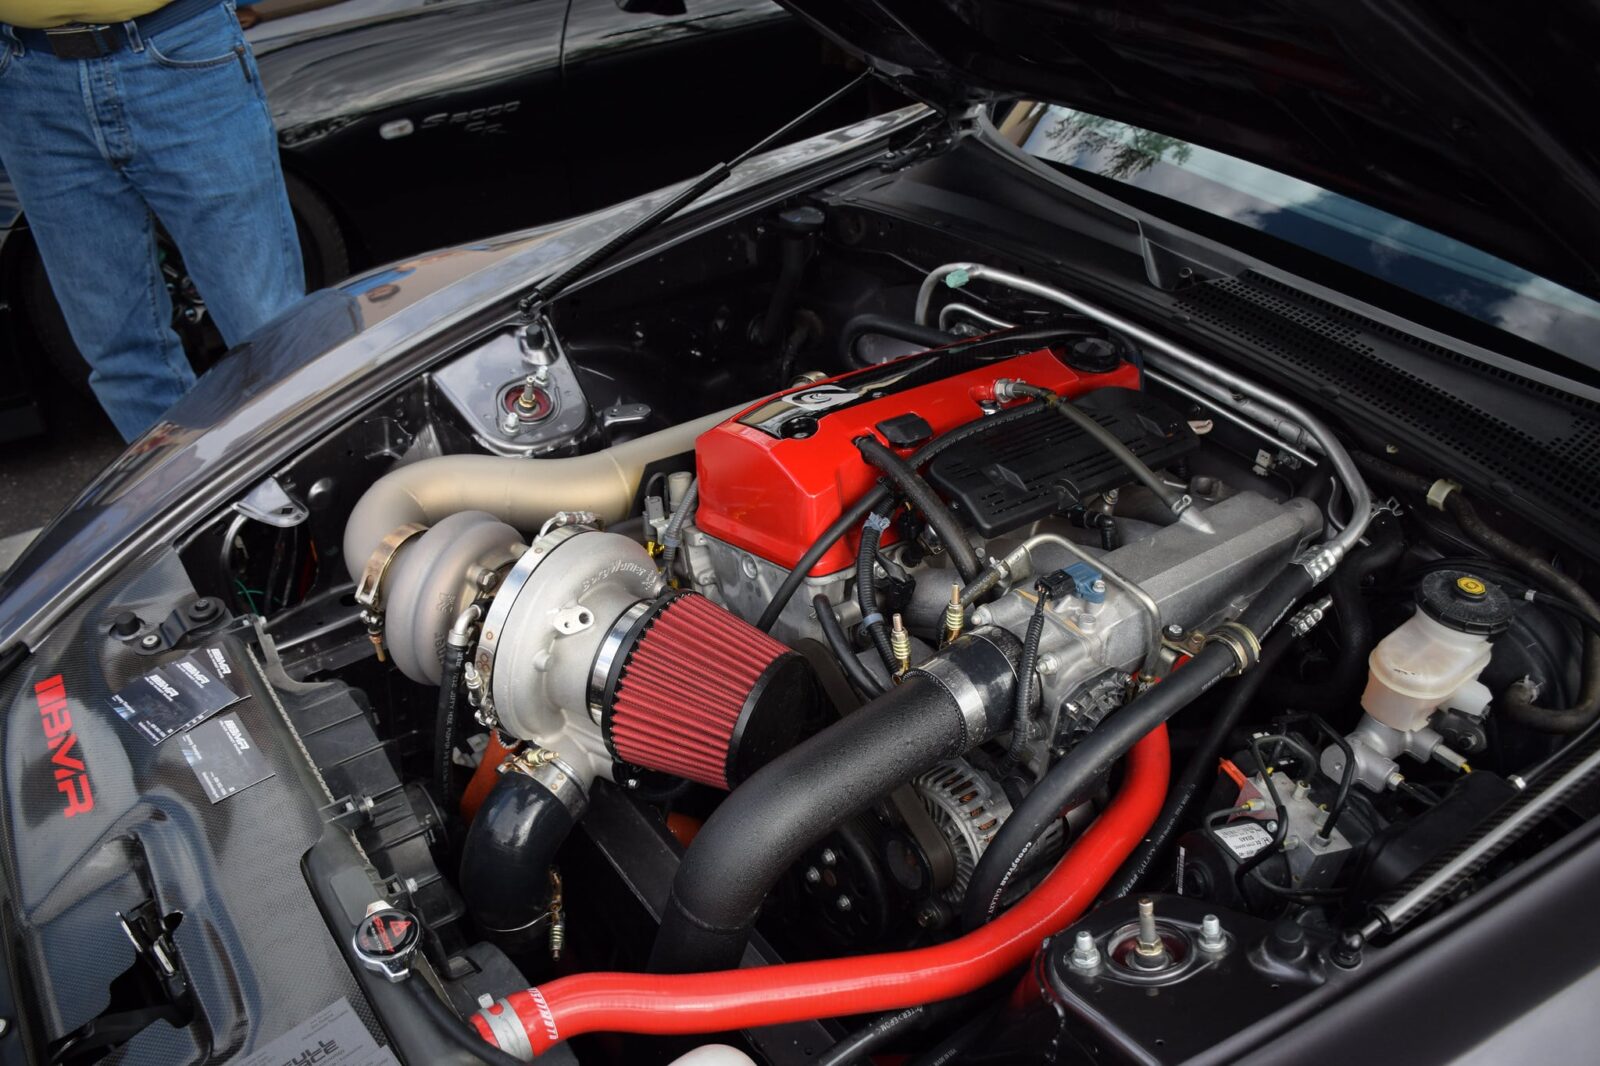 How Much Horsepower Does the S2000 Turbo Kit Have?